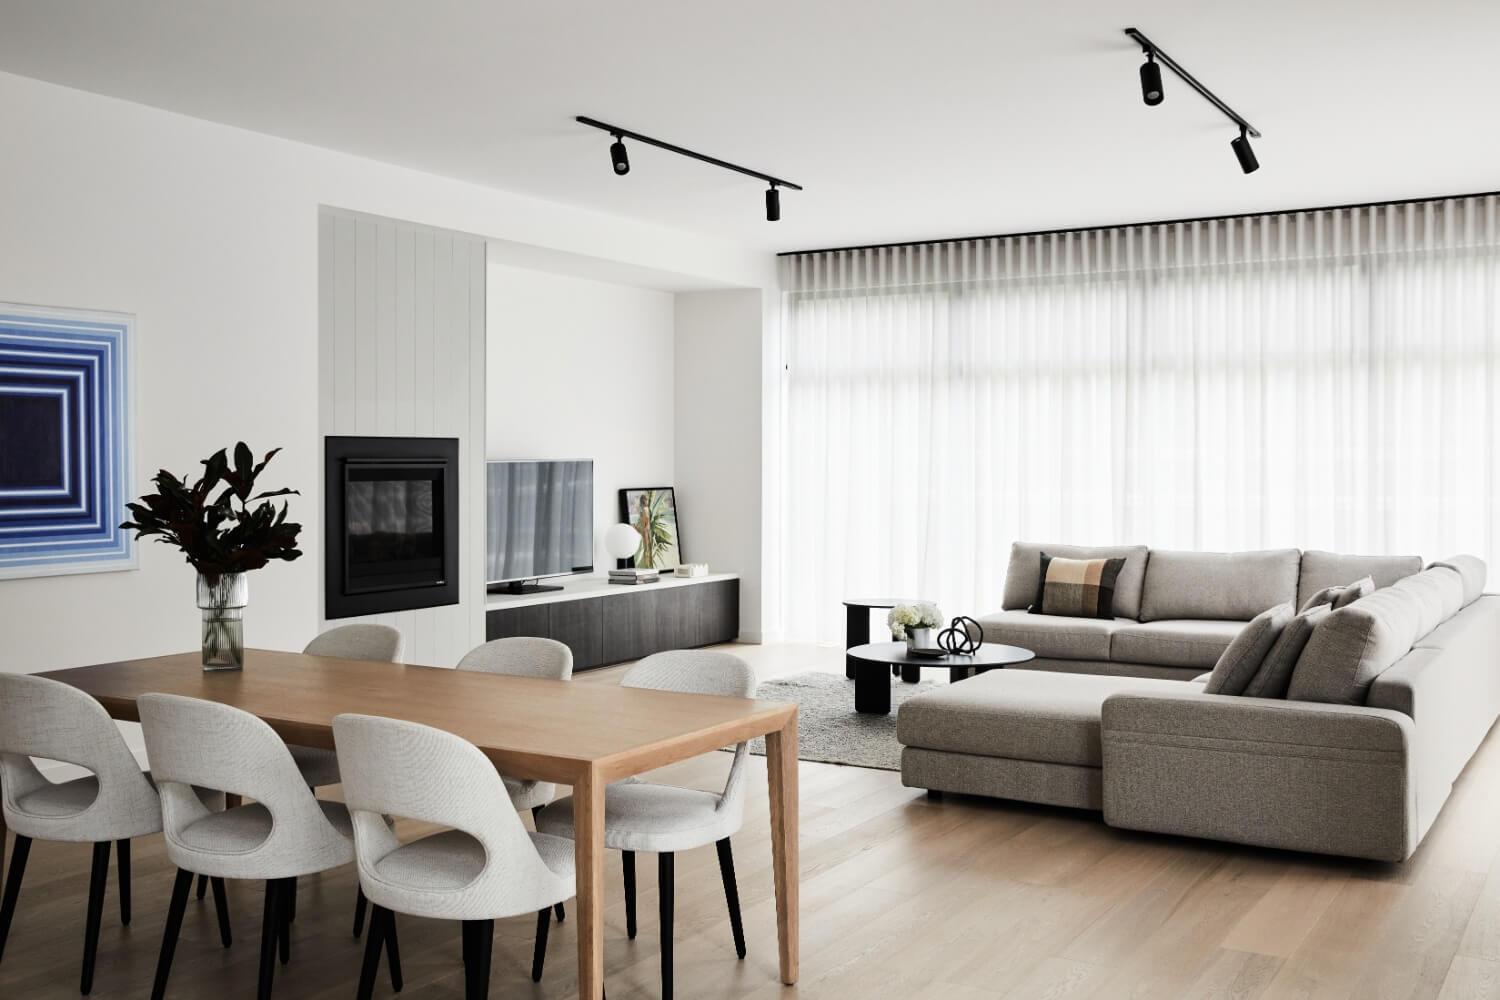 Combination Of Grey And Brown Furnishing Create Clean And Timeless Aesthetic